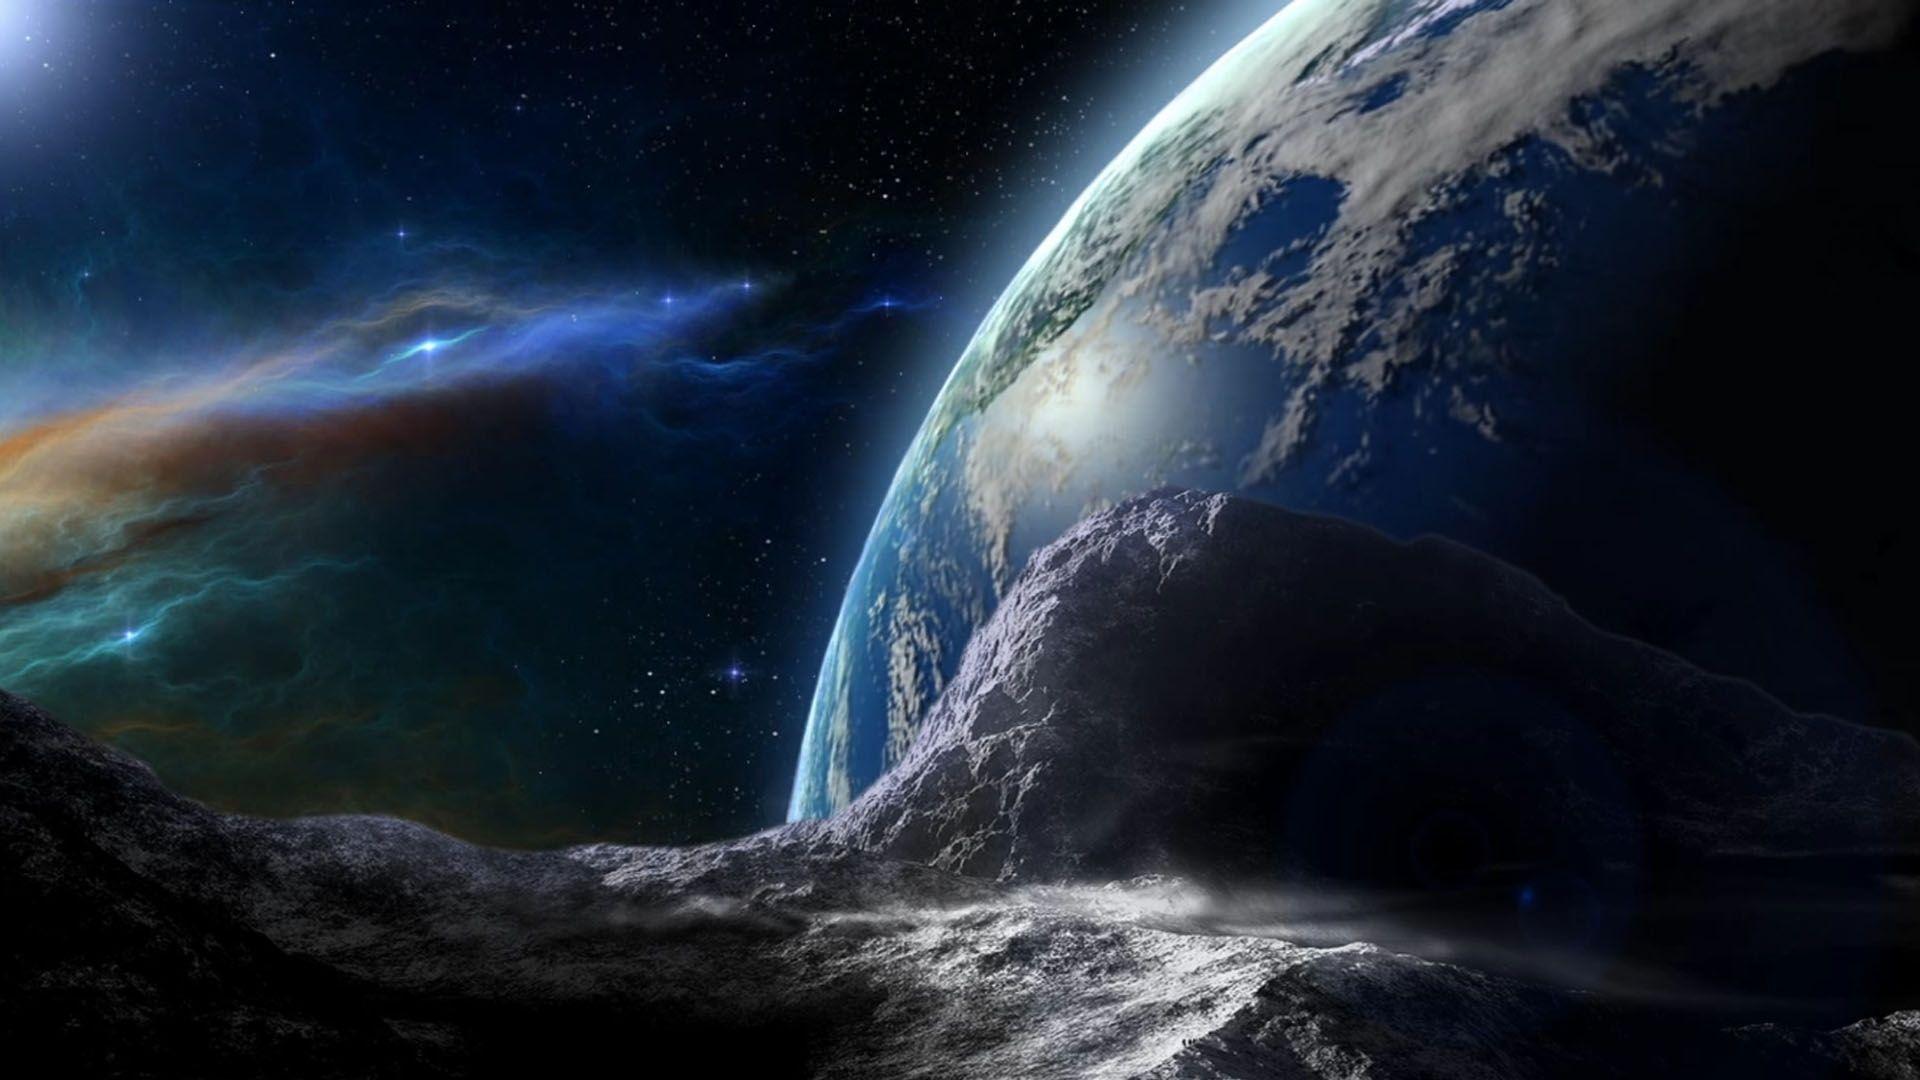 Space Wallpaper Moving - 46+ Animated Earth Wallpaper on